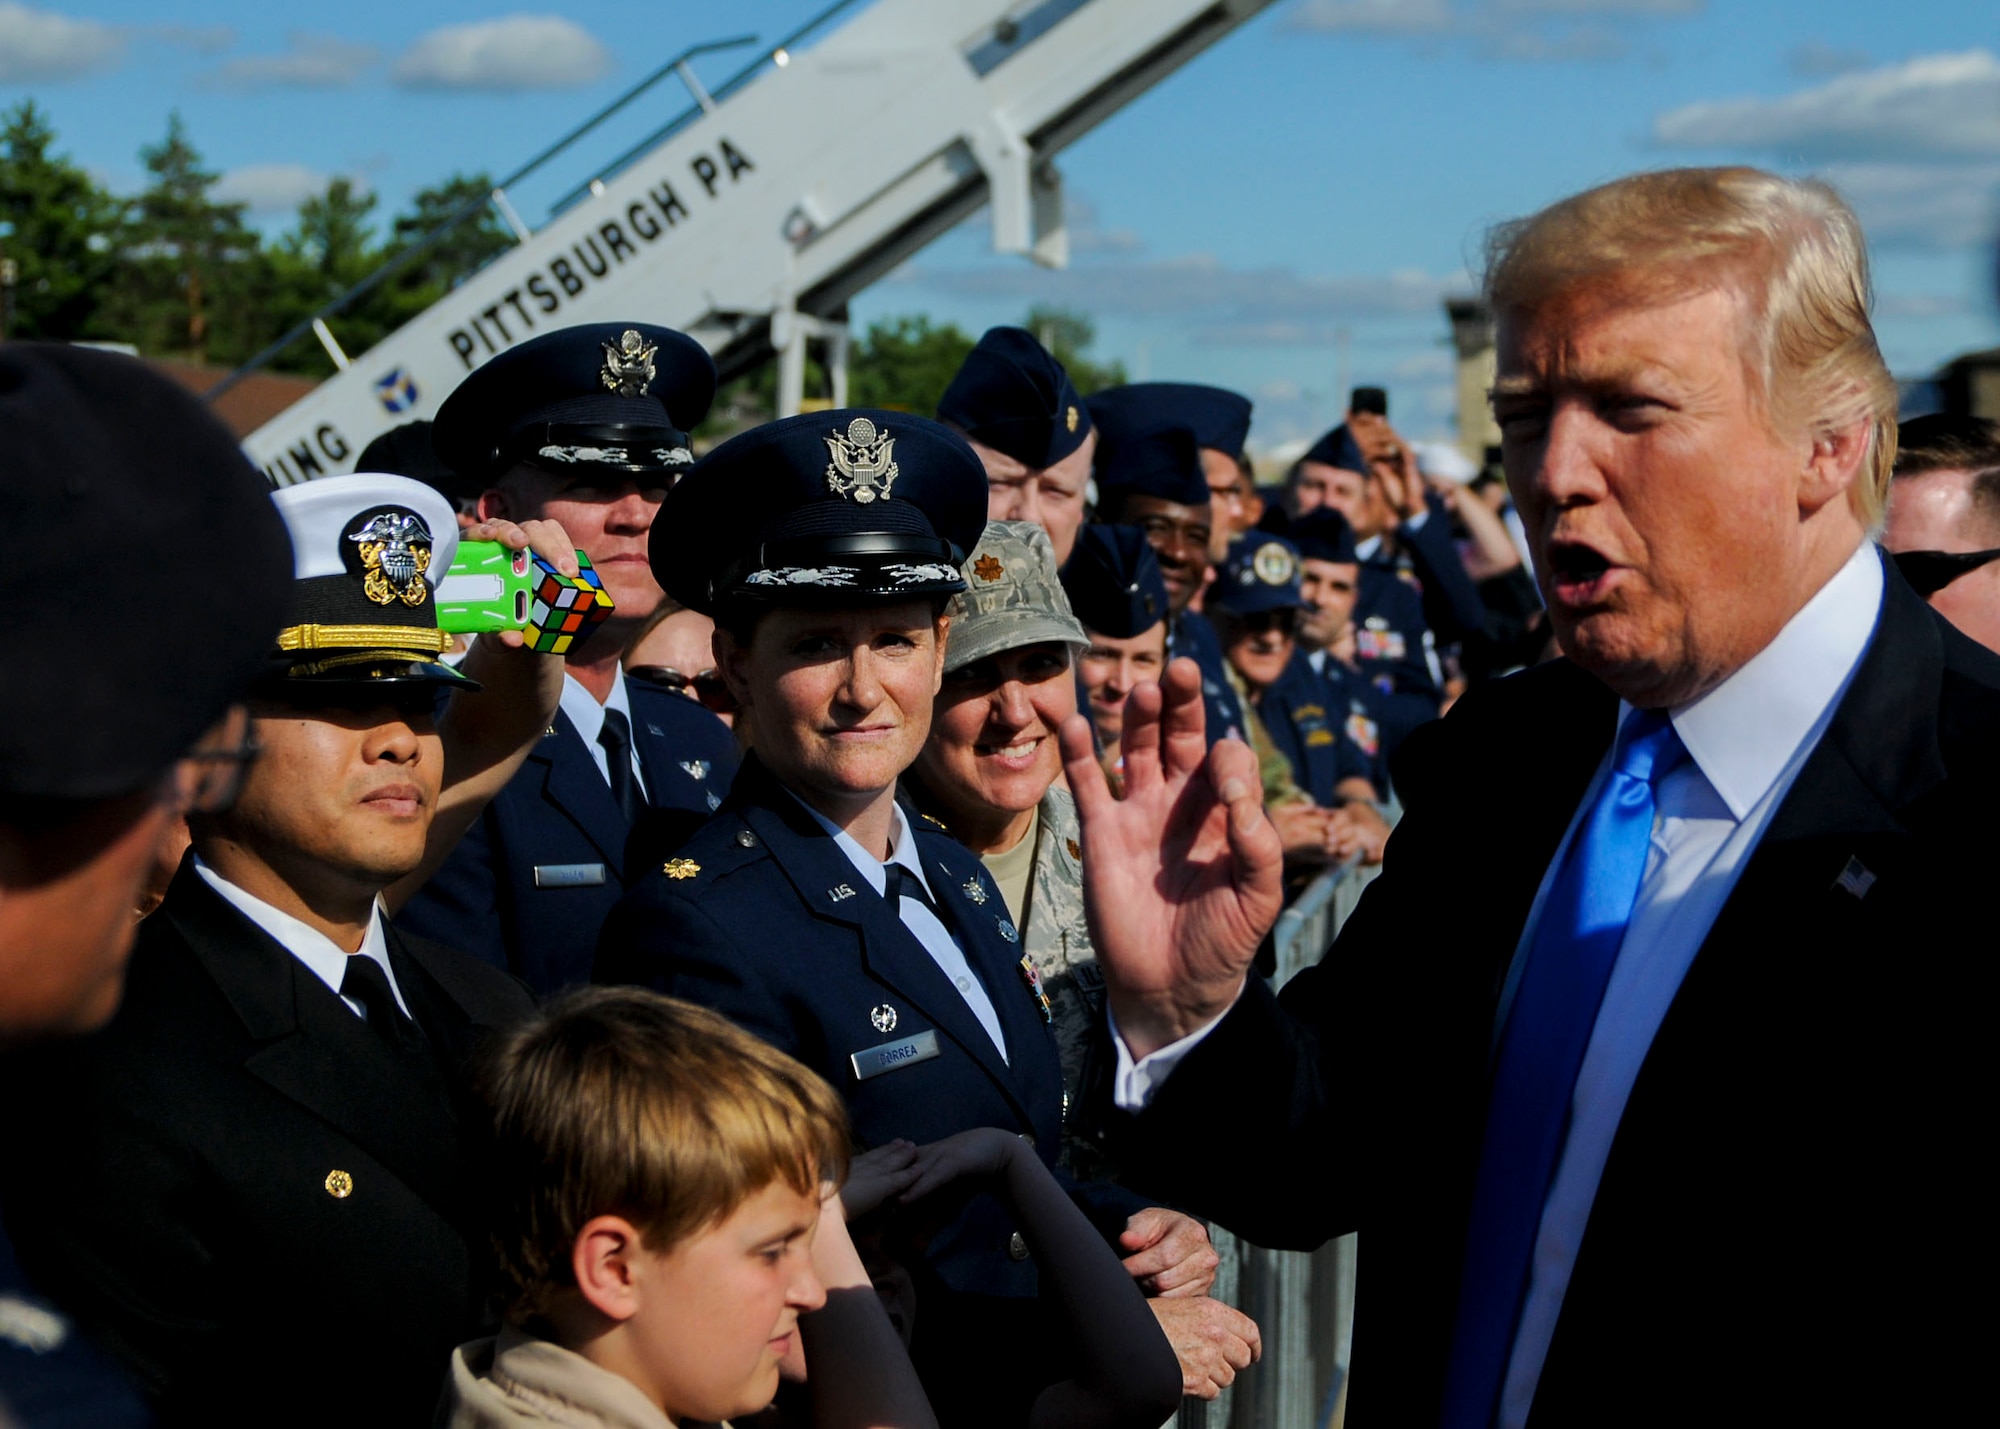 U.S. President Donald Trump talks with Citizen Airmen, Sailors and Marines assigned here, along with other guests, during a visit July 25, 2017. Trump landed at YARS prior to attending events in and around Youngstown. (U.S. Air Force photo/Senior Airman Jeffrey Grossi)